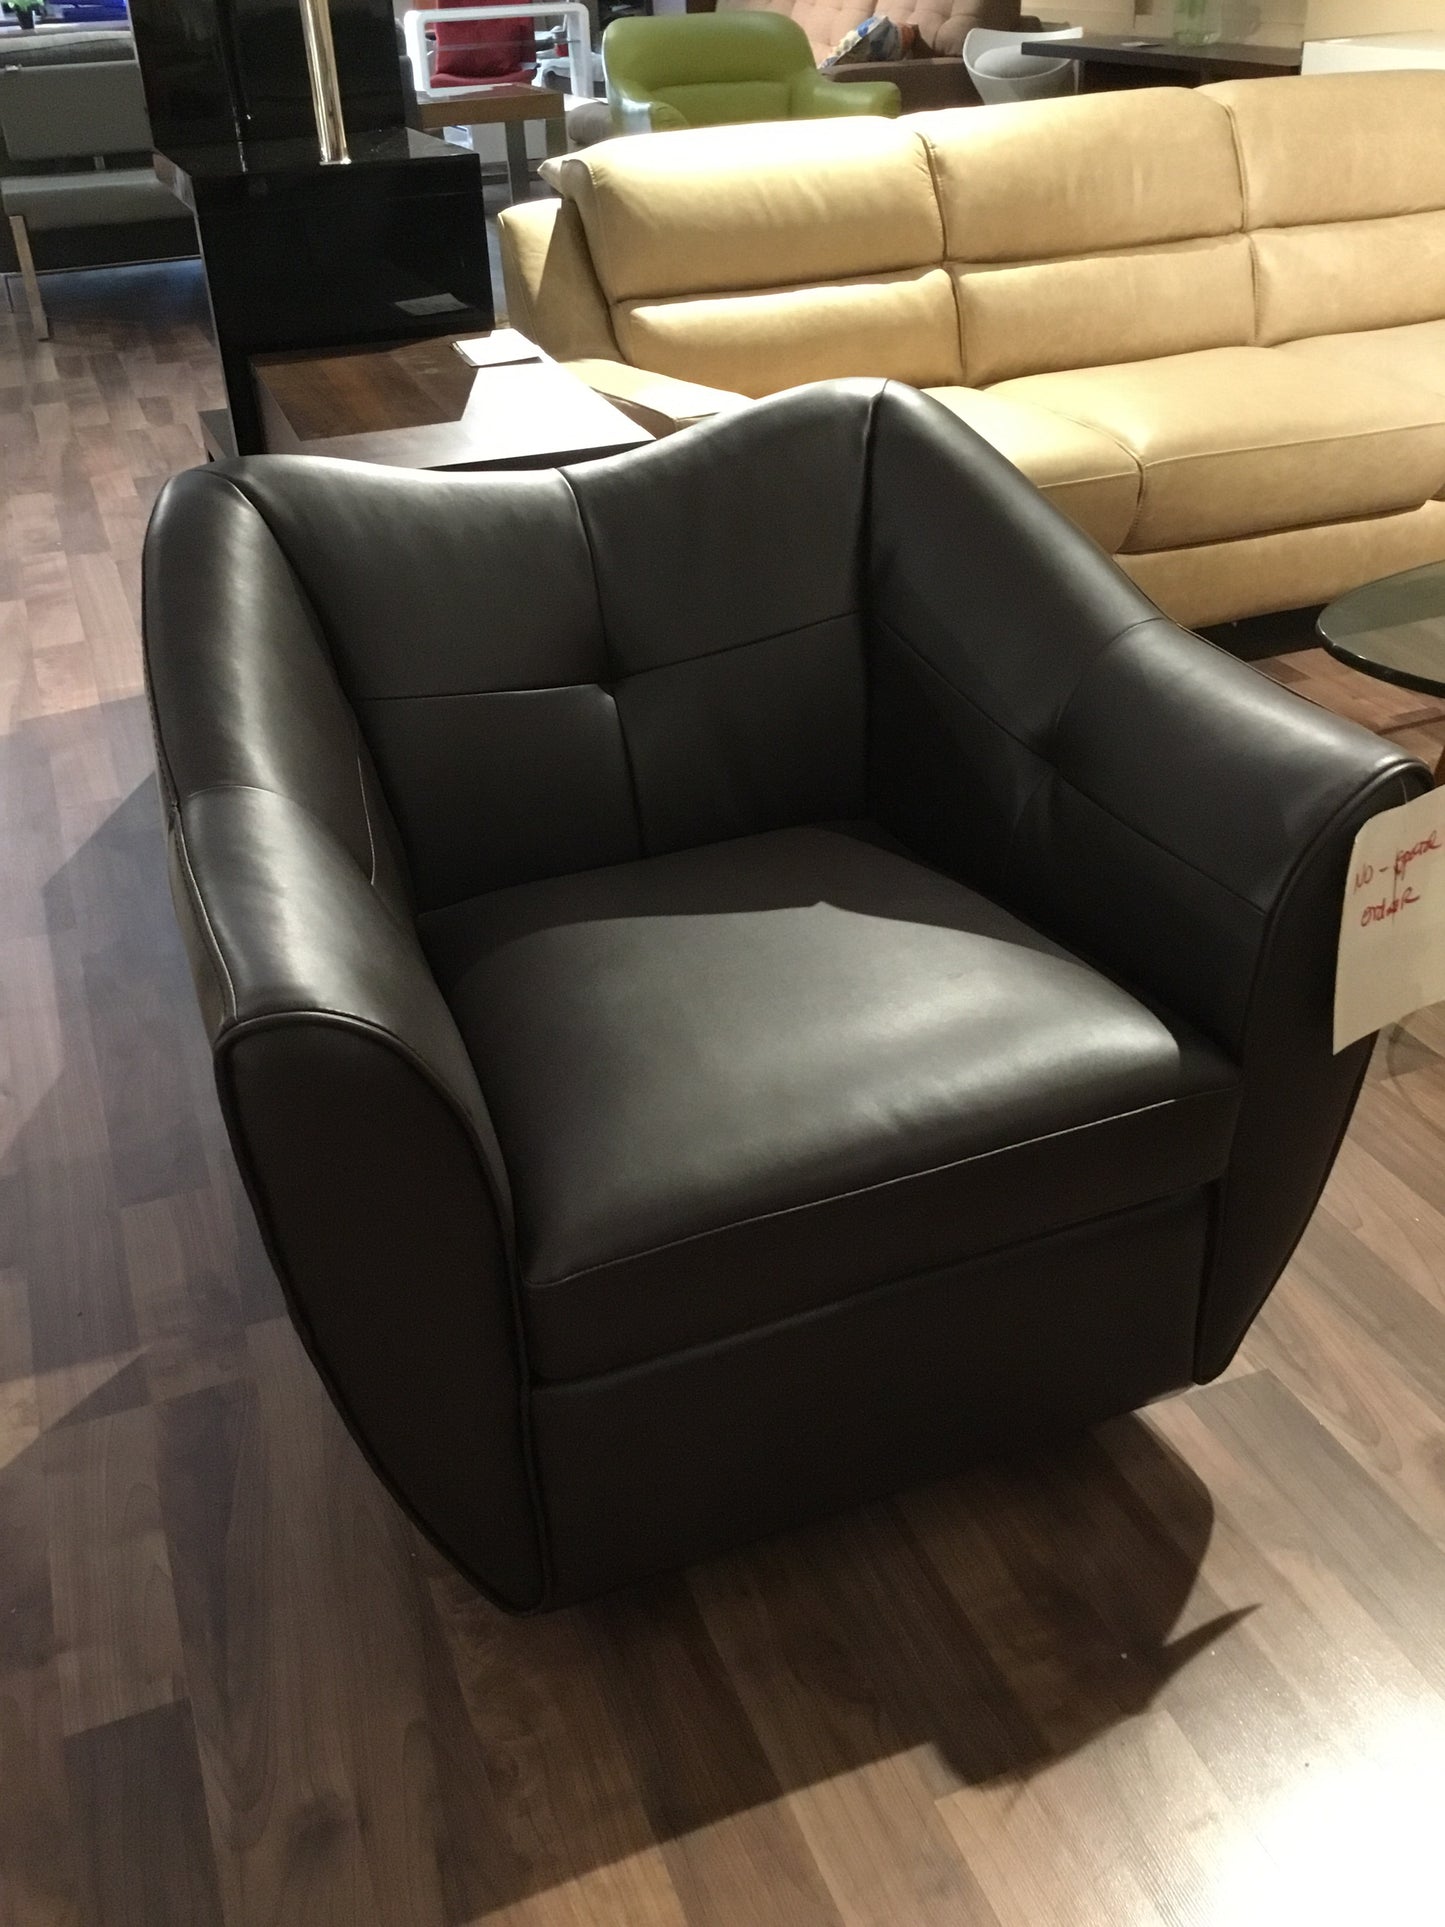 EURO A853 swivel accent chair chocolate color